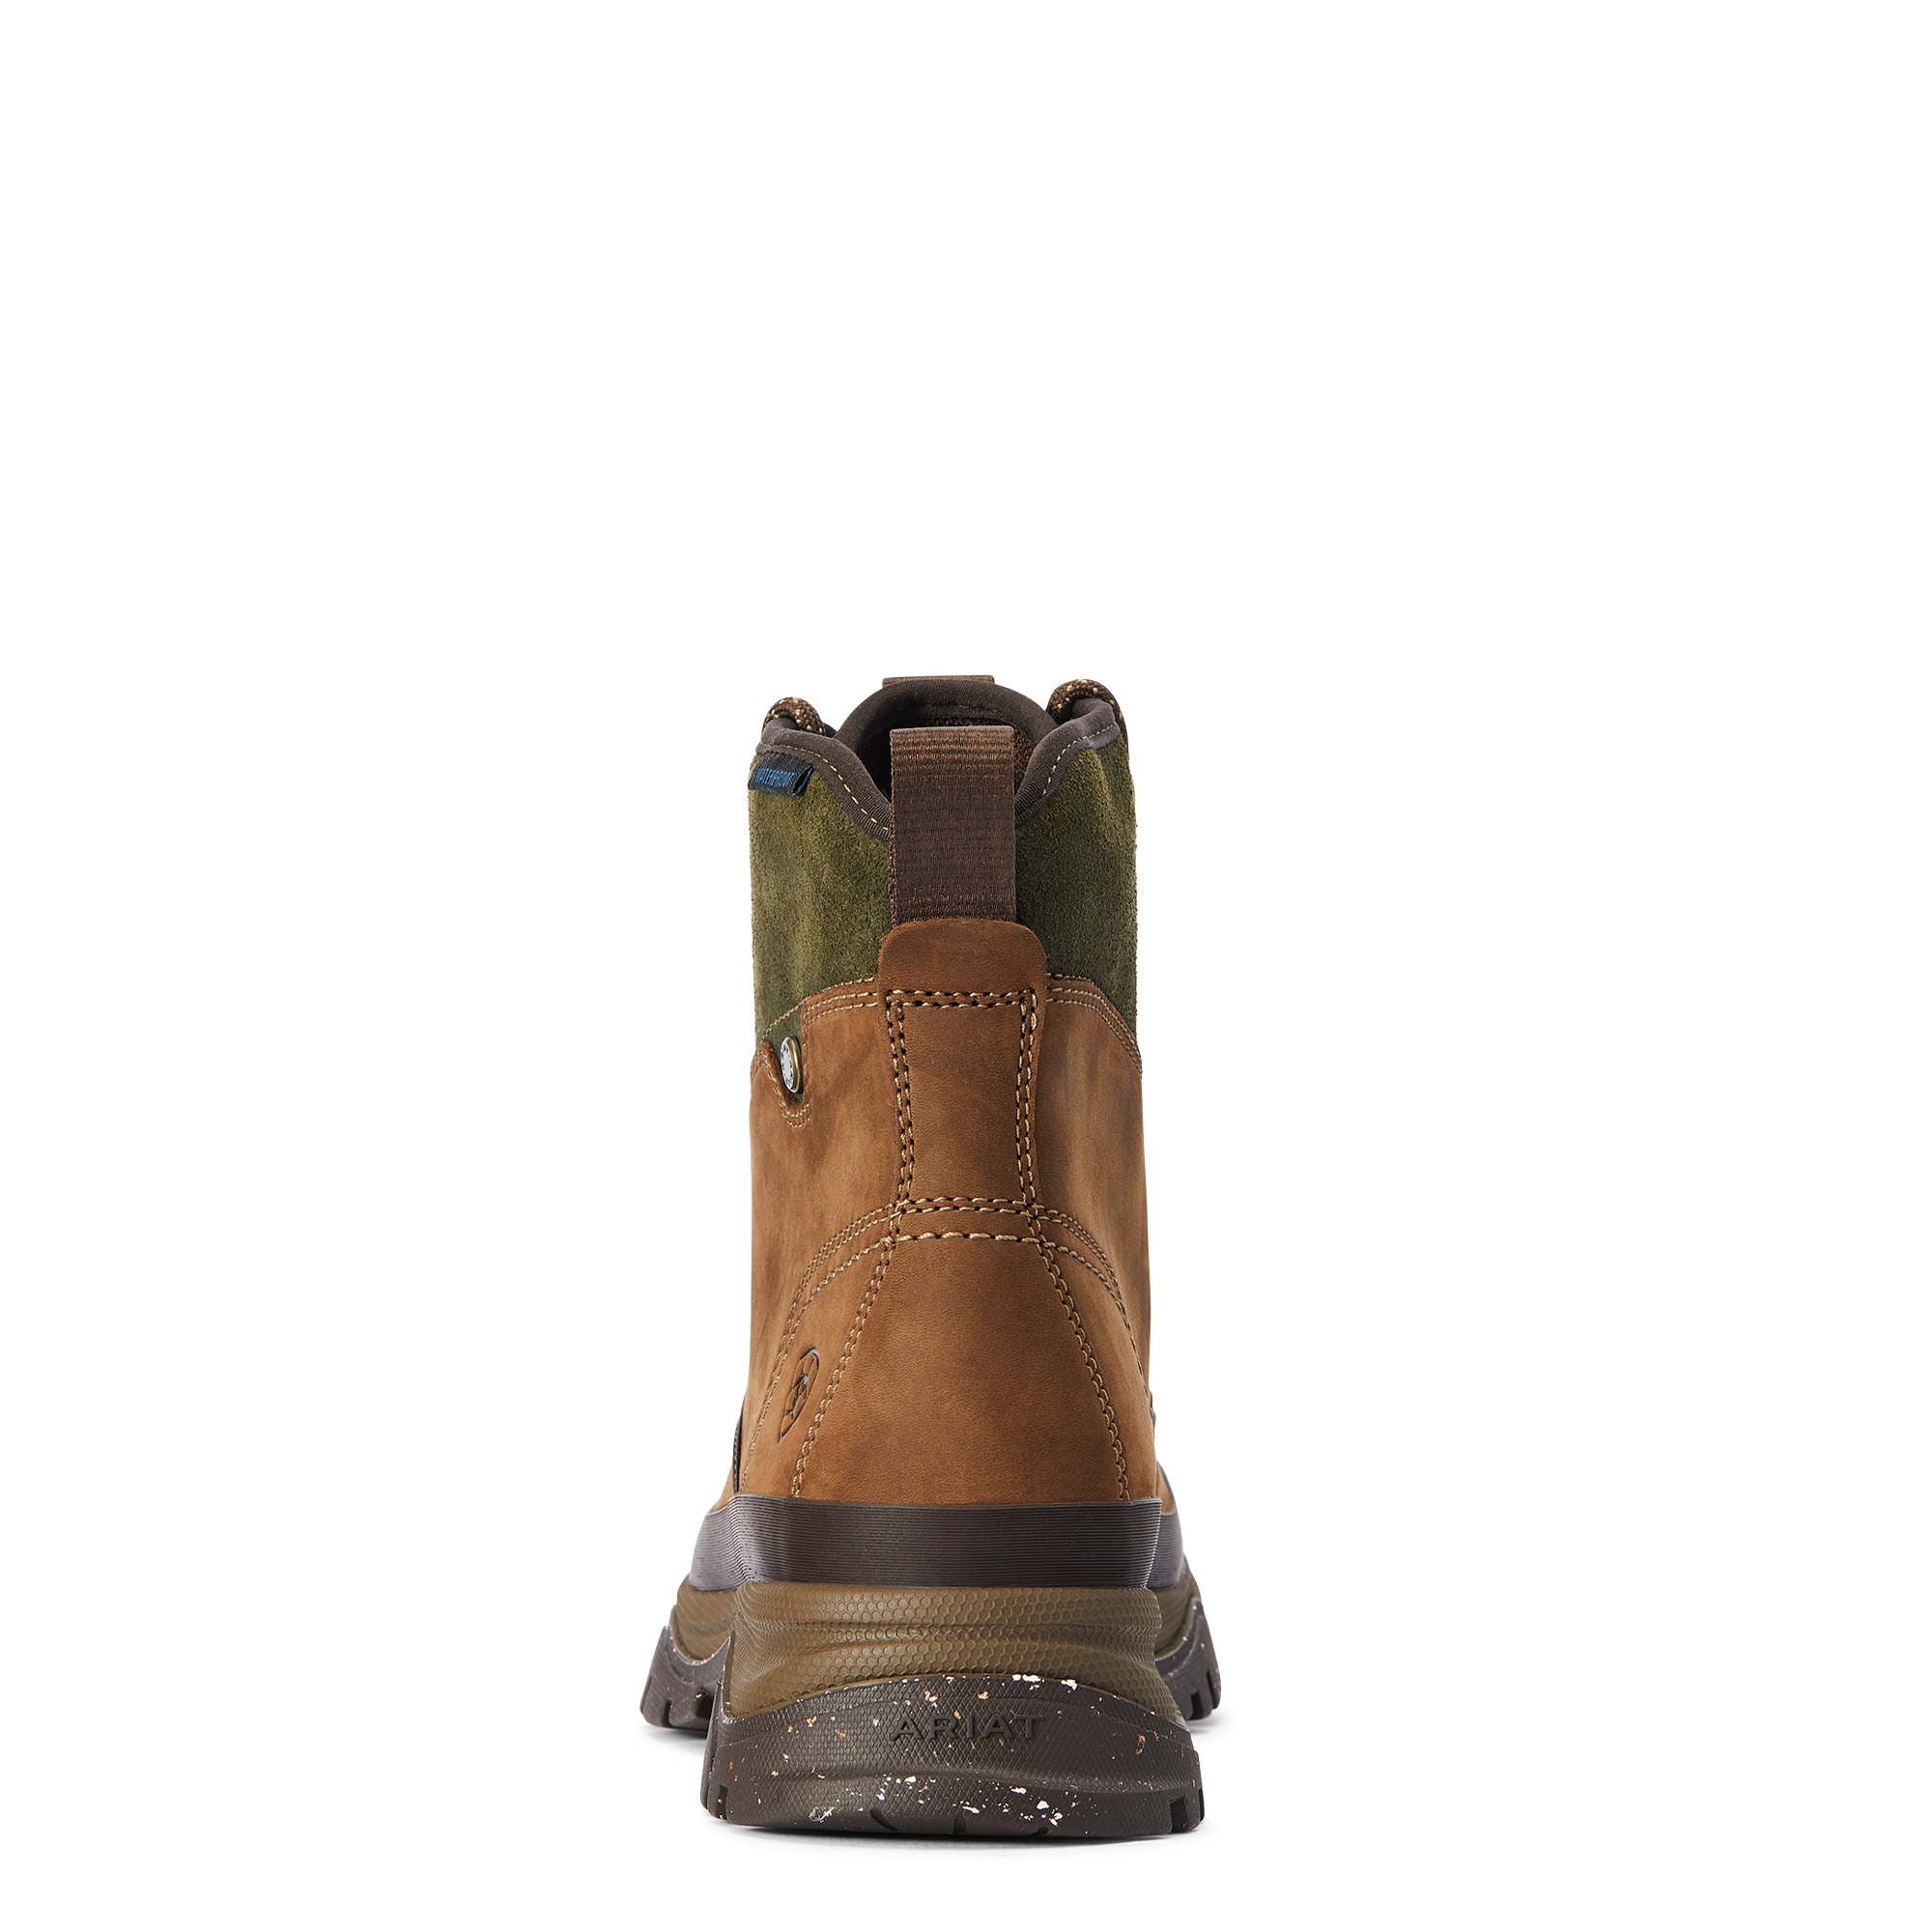 Boots WMS MORESBY WATERPROOF BOOT Oily Distressed Brown/Olive - Reitstiefel Kandel - Dein Reitshop